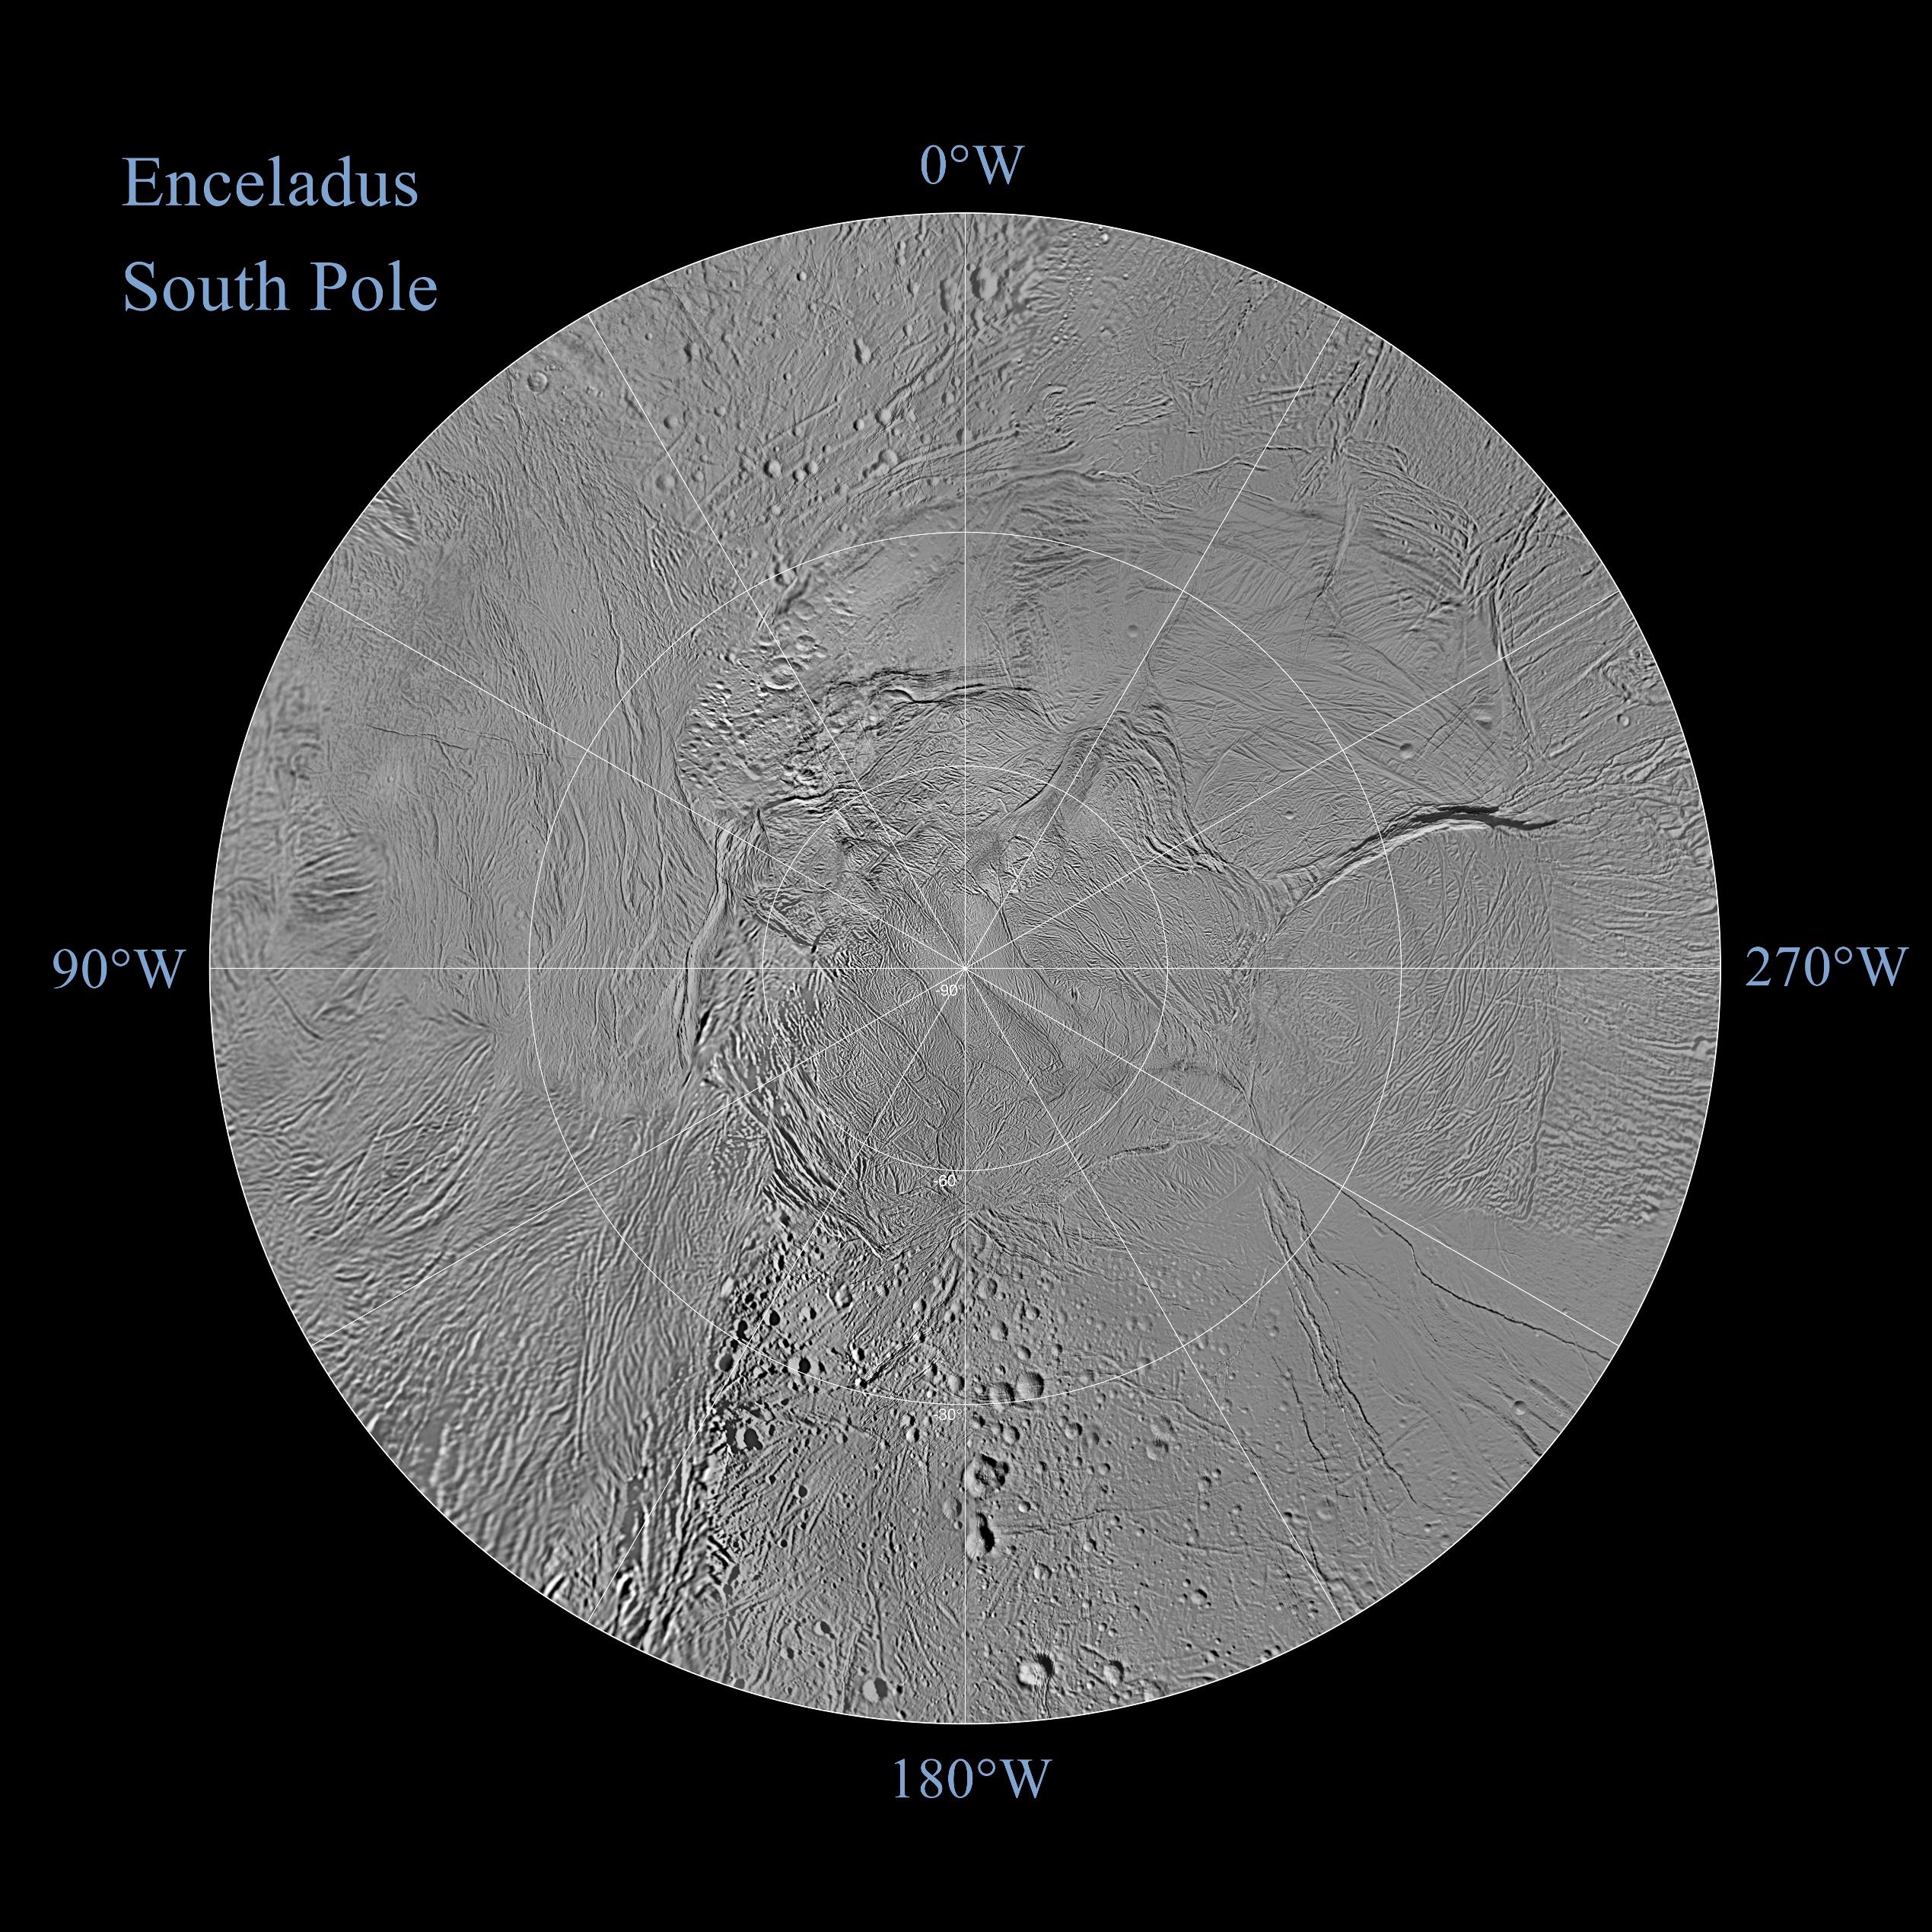 The northern and southern hemispheres of Enceladus are seen in these polar stereographic maps